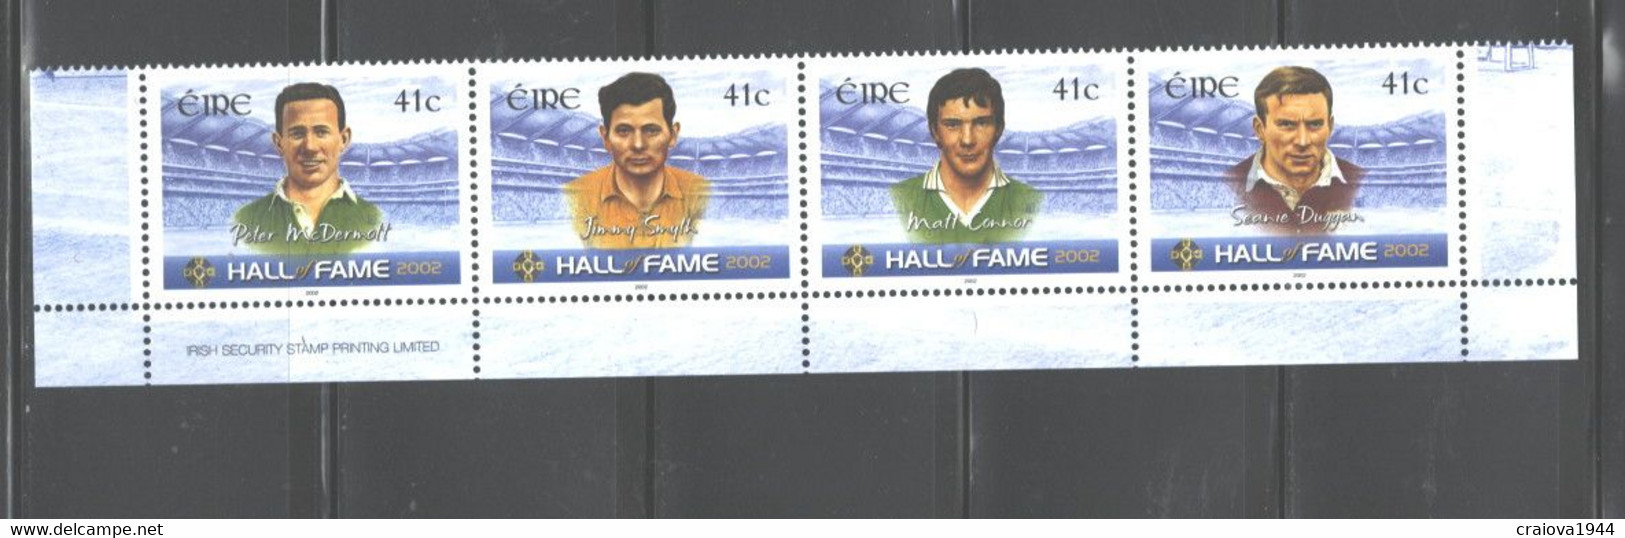 IRELAND 2002, "HALL Of FAME ATHLETS",STRIP. #1432a MNH - Unused Stamps